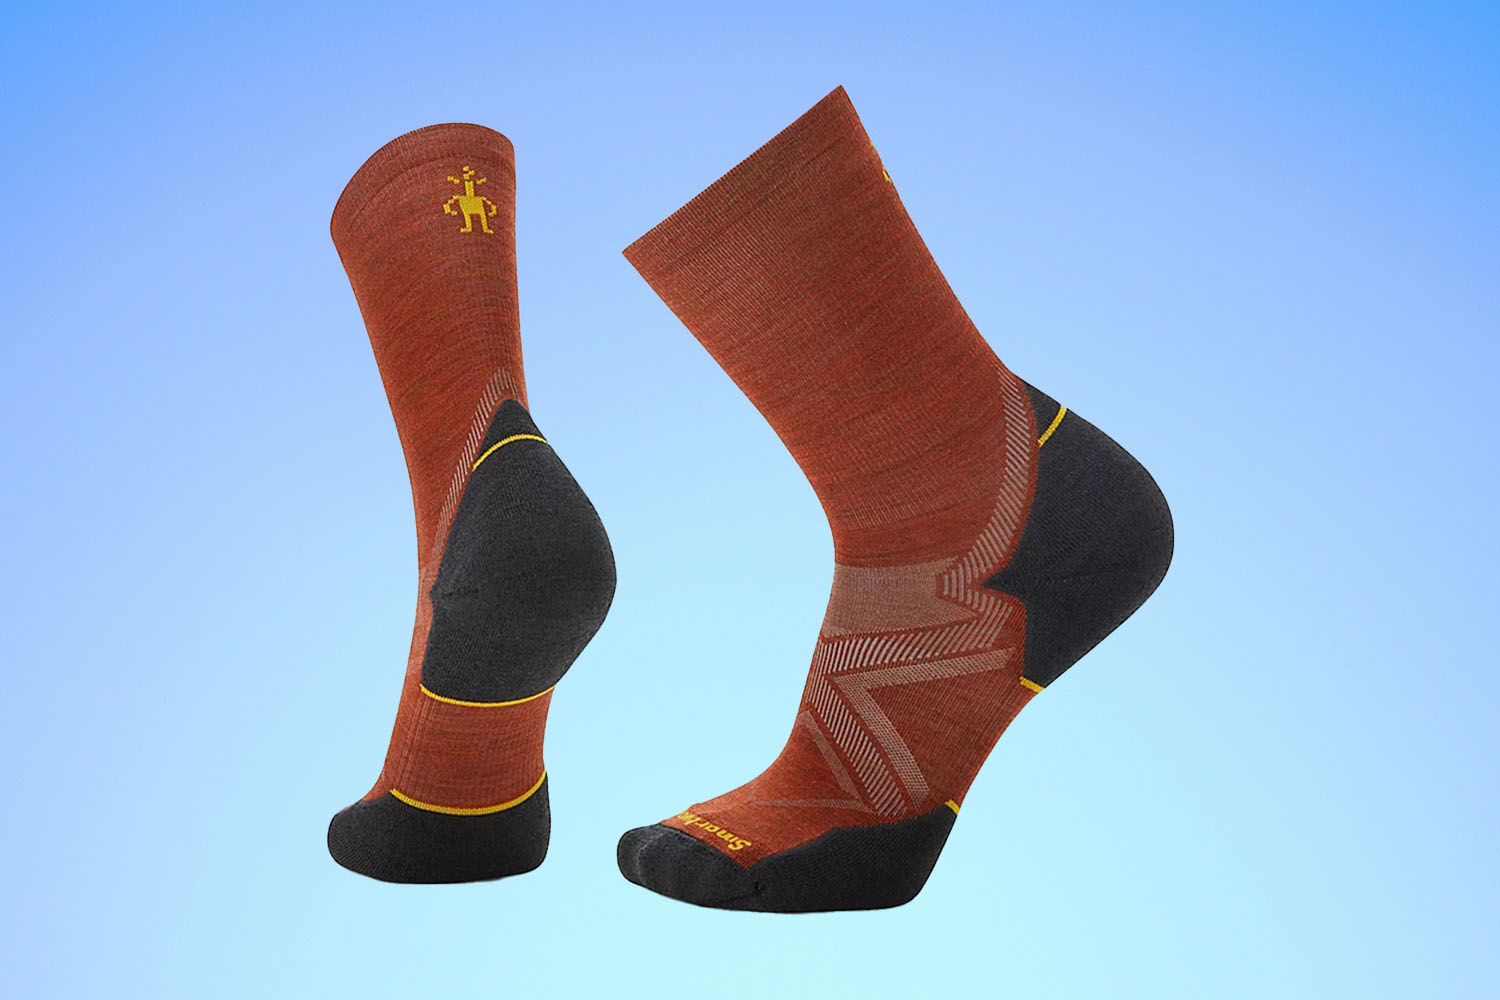 a pair of red and grey Smartwool running socks on a blue gradient background